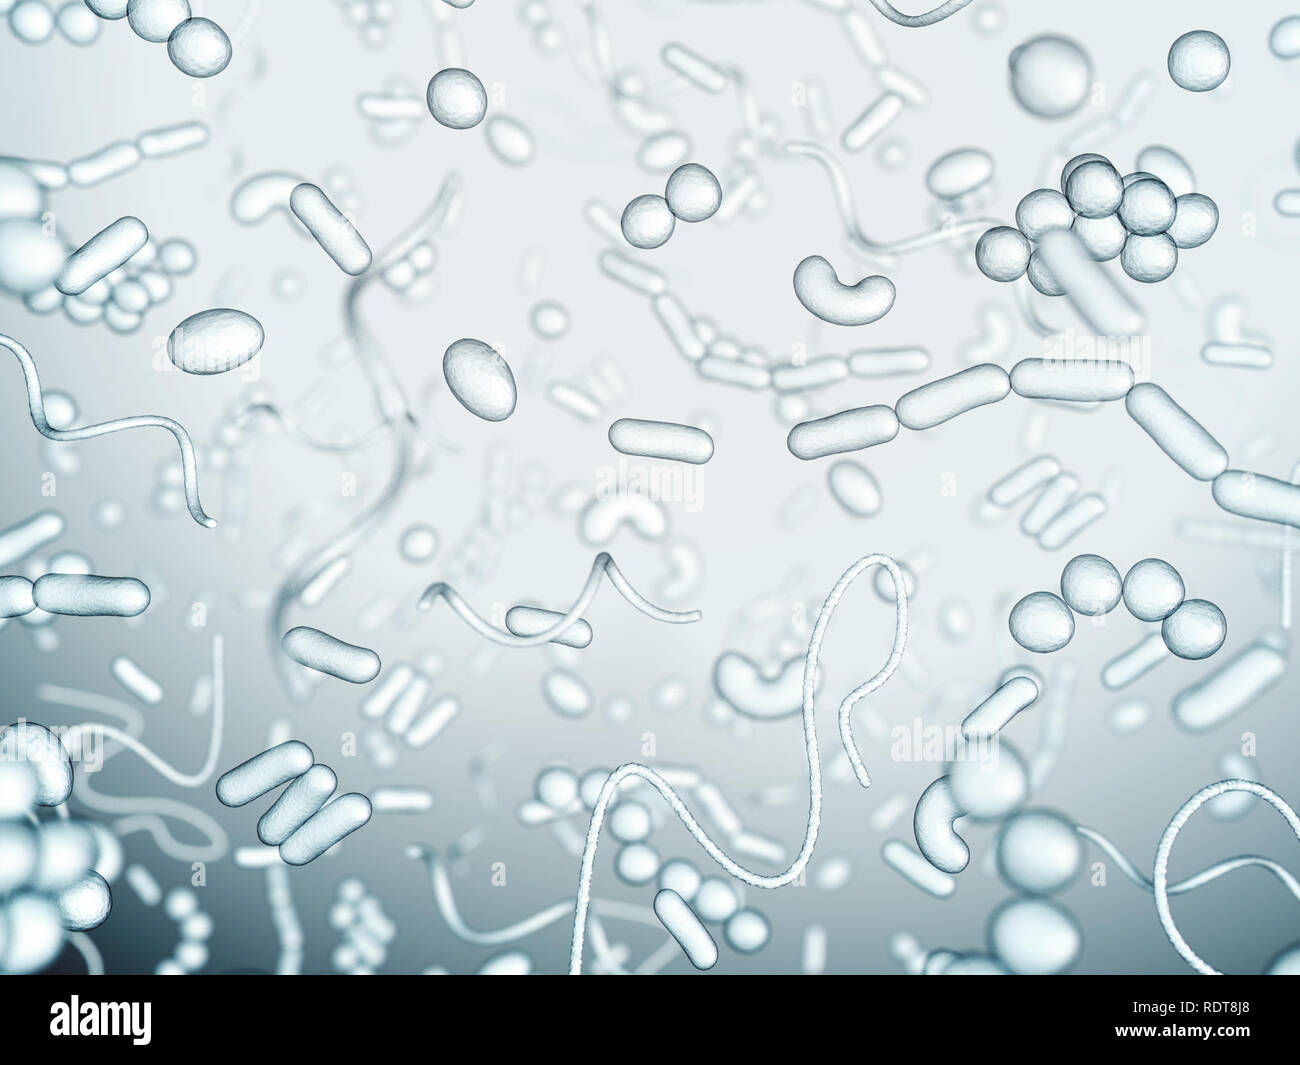 Different types of bacteria Stock Photo